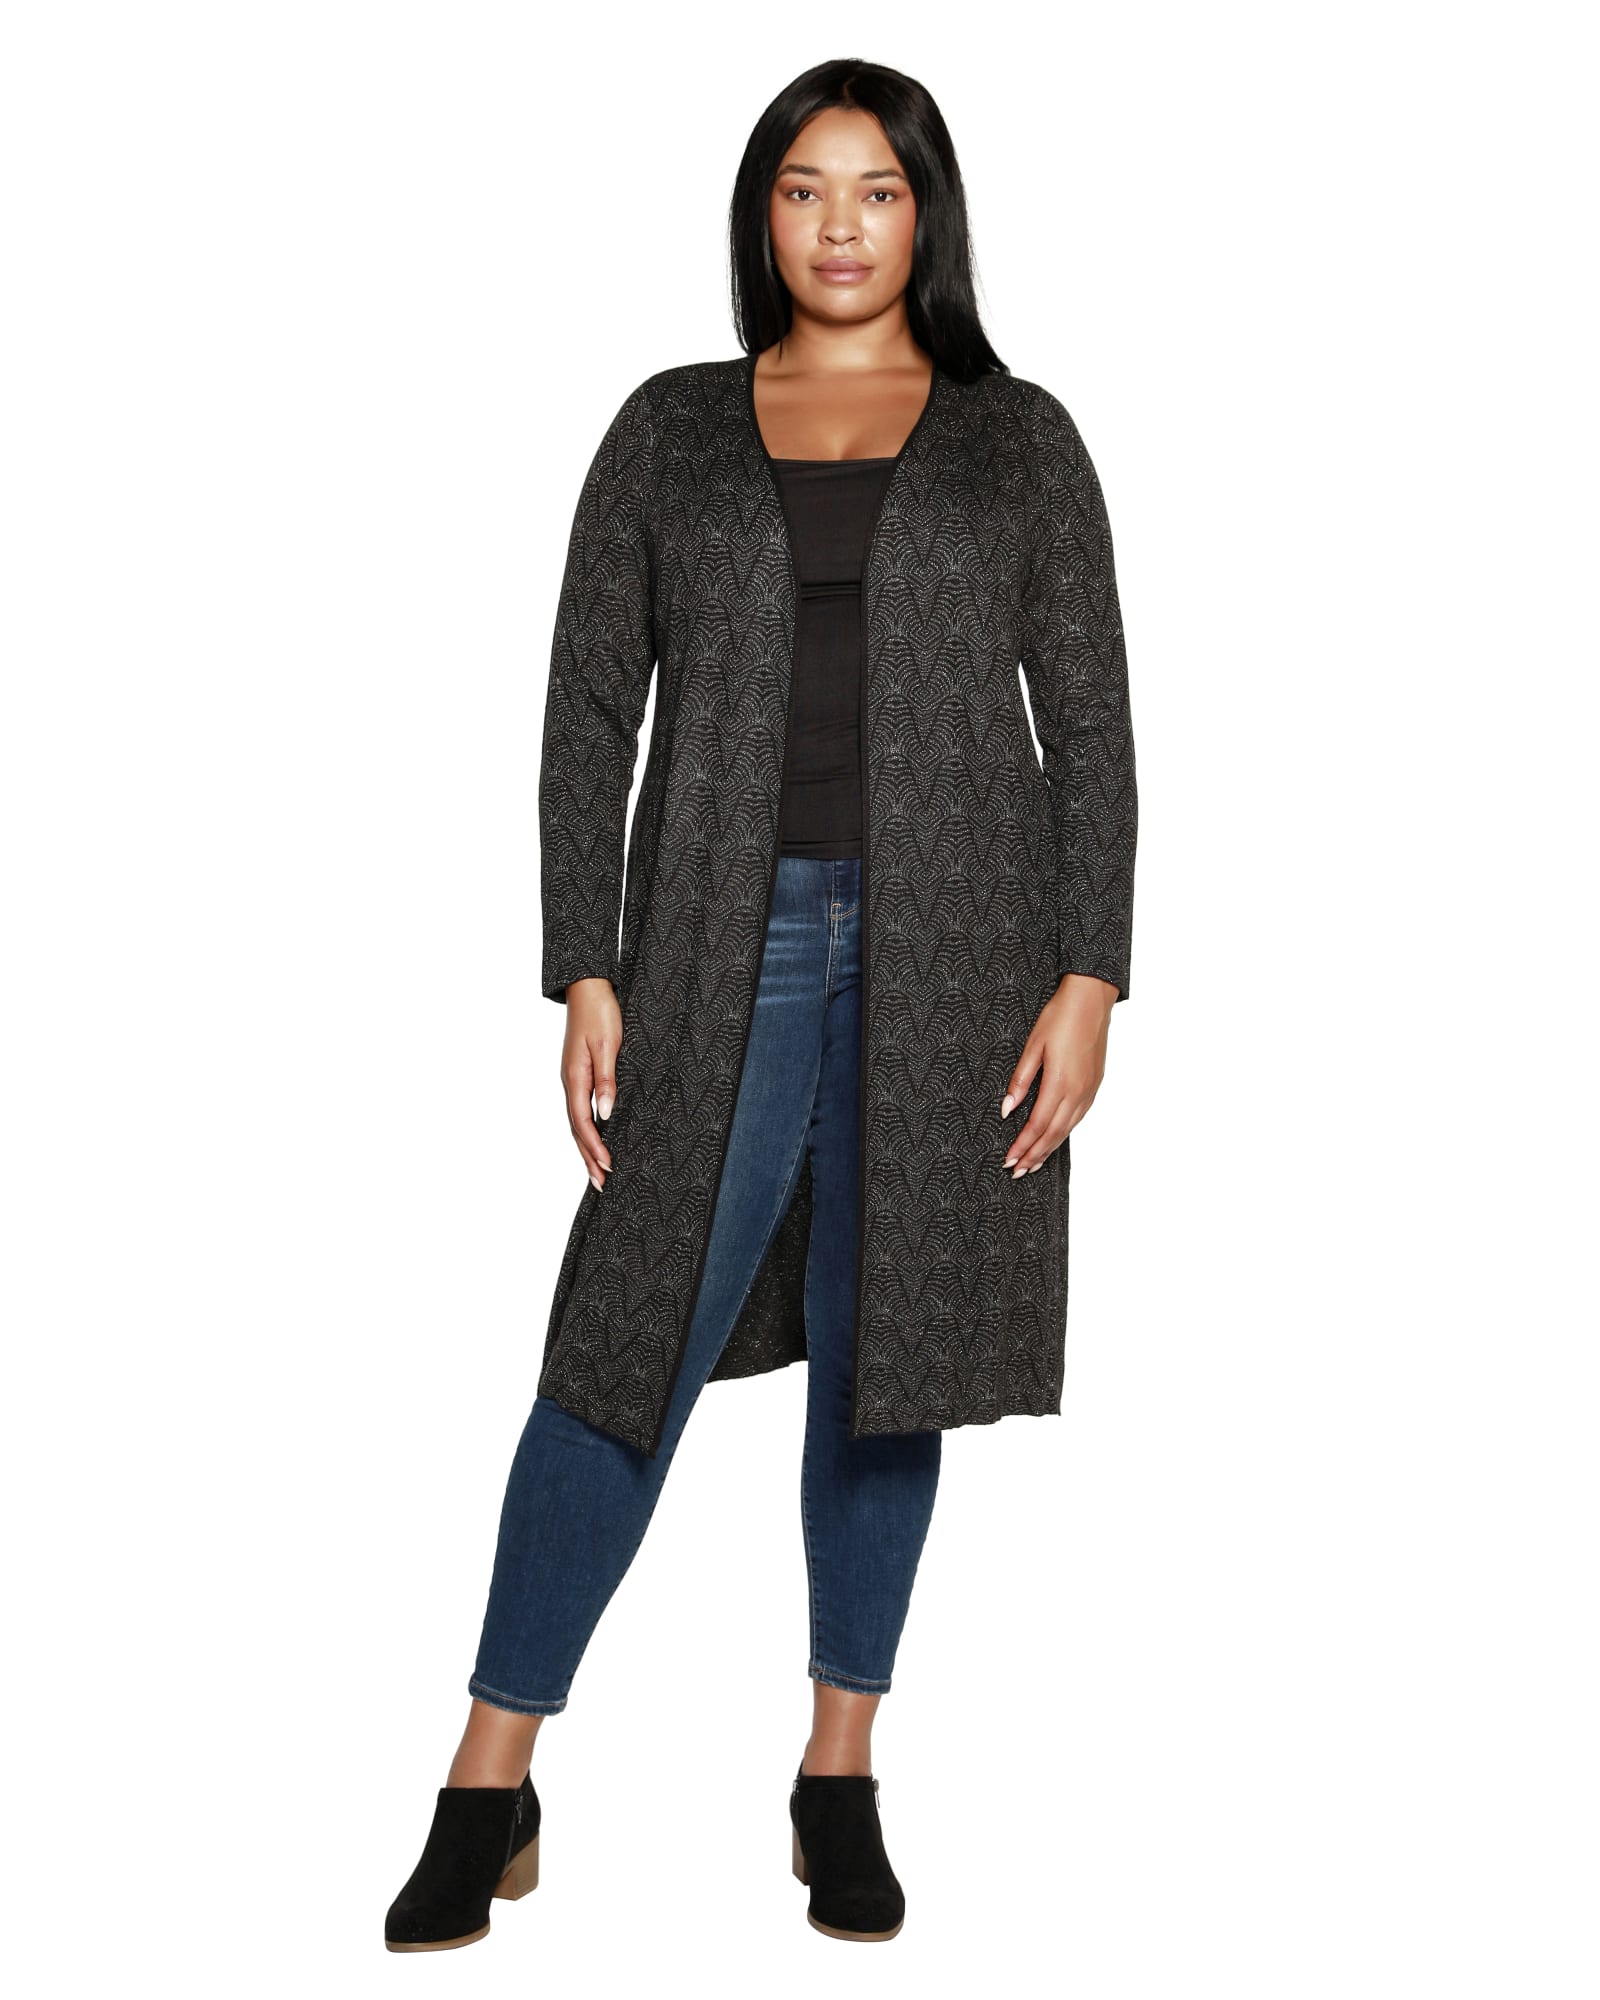 Tall Women's Clothing, Tall Sweater & Cardigans